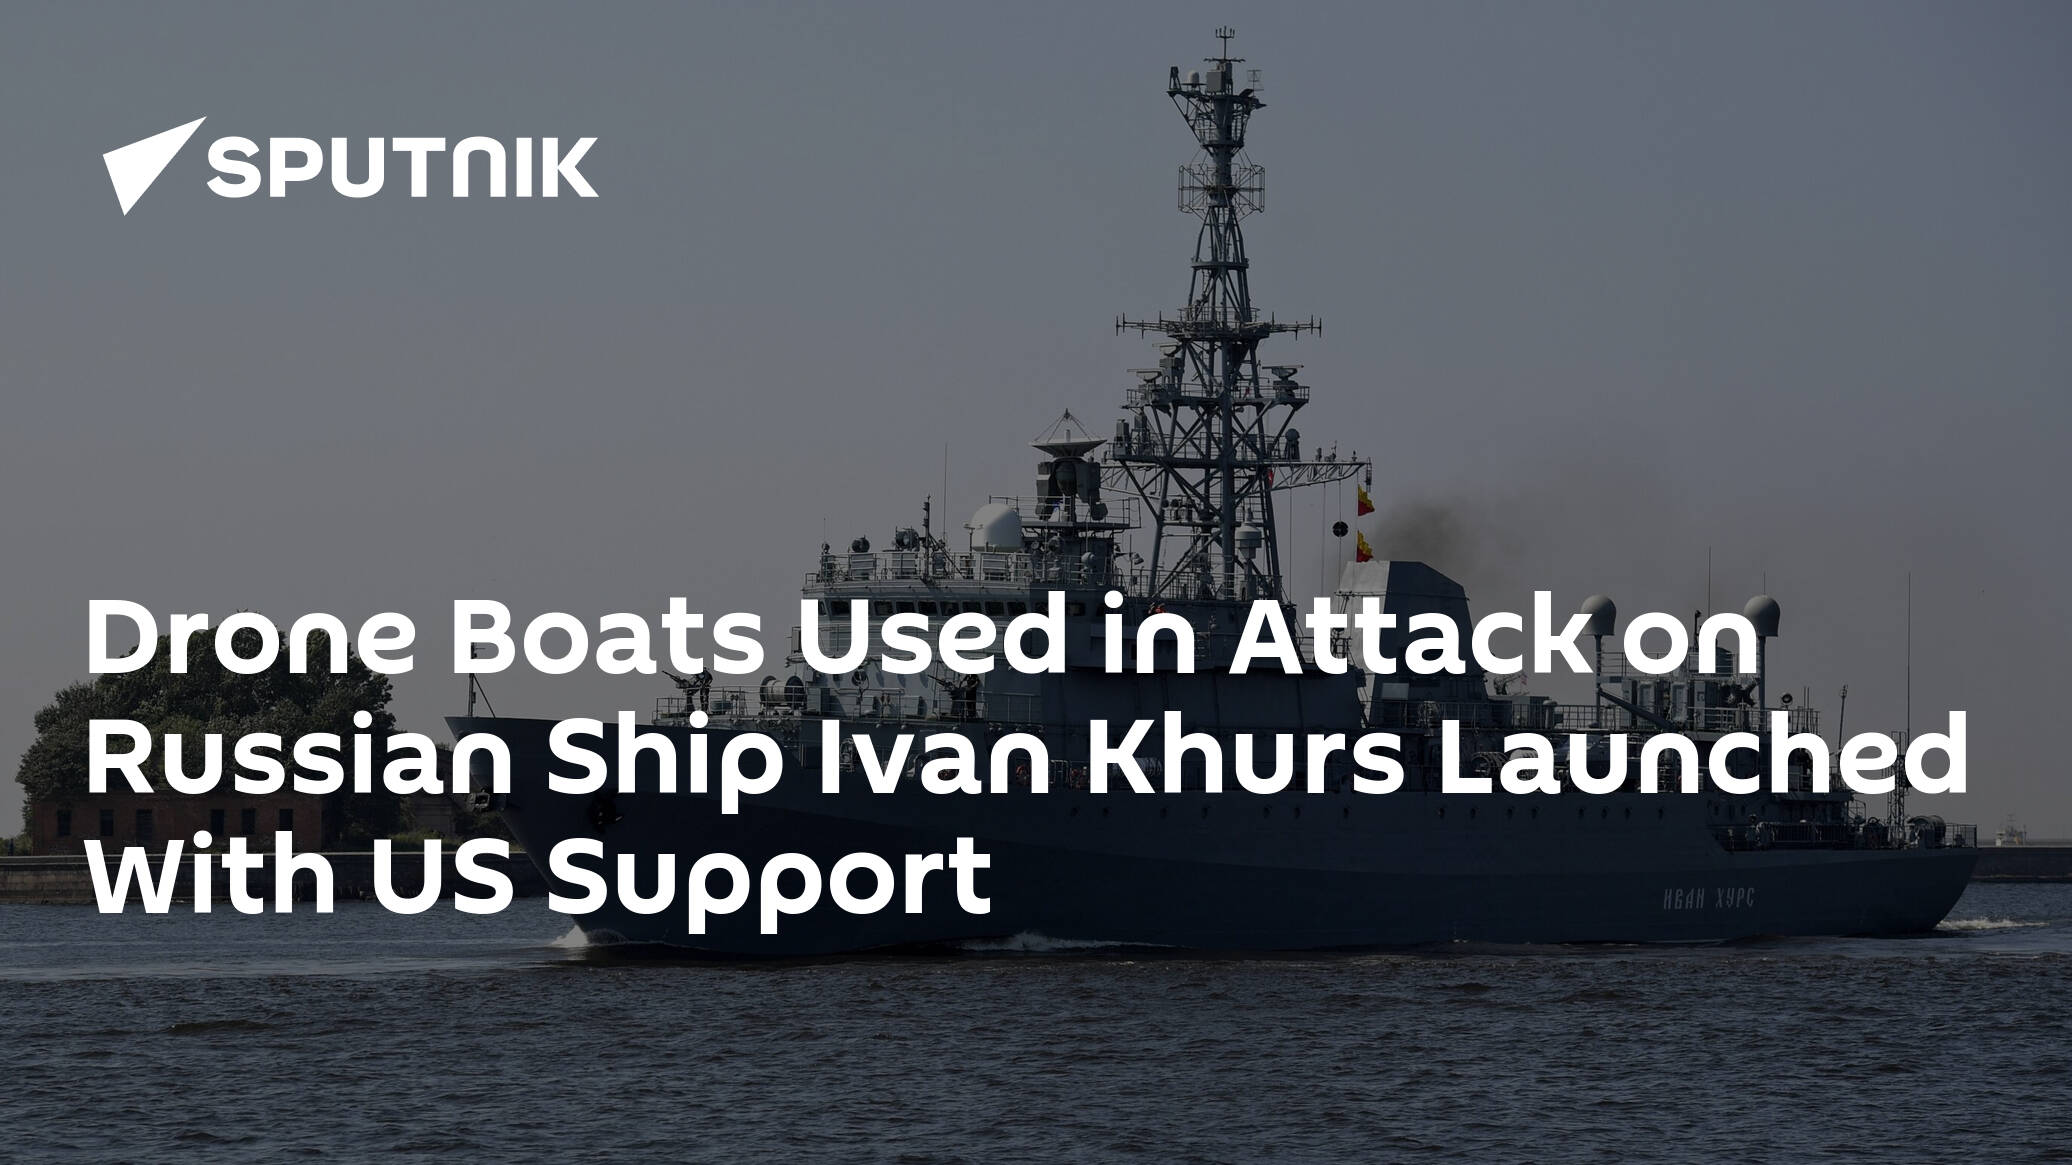 Drone Boats Used in Attack on Russian Ship Ivan Khurs Launched With US Support – Source